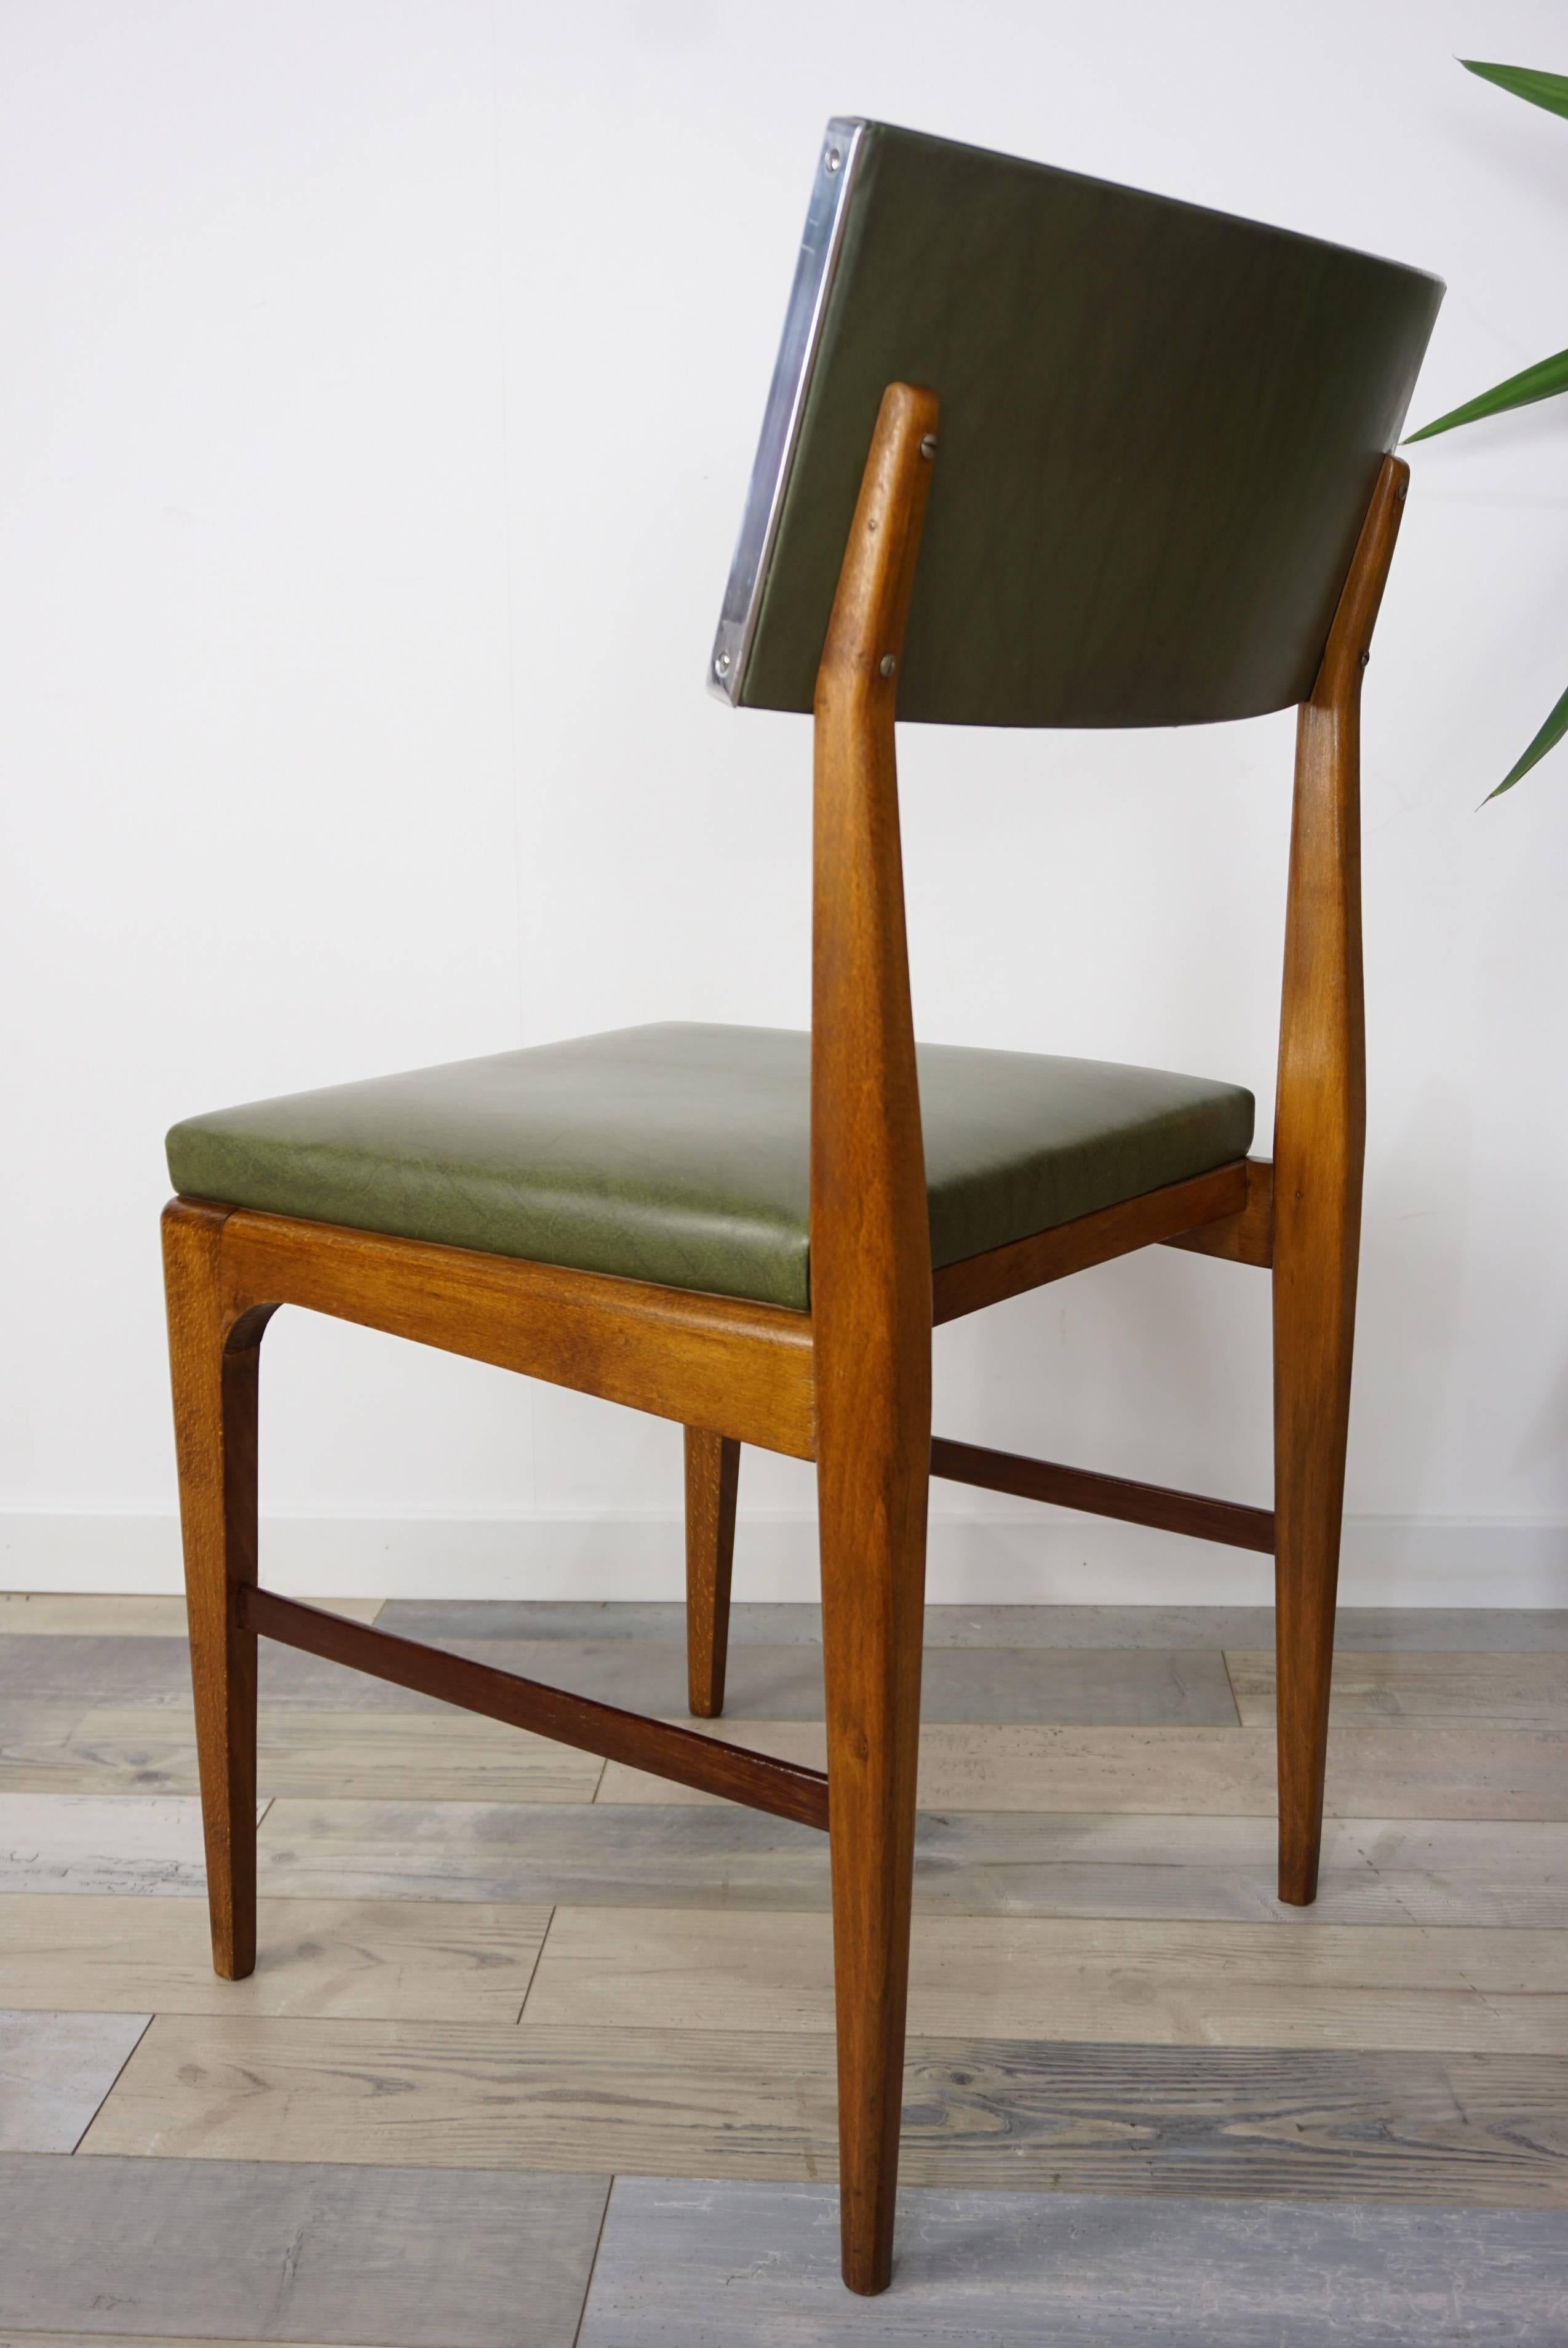 Wooden Teak and Green Faux Leather Scandinavian Style Dutch Design Chair 2